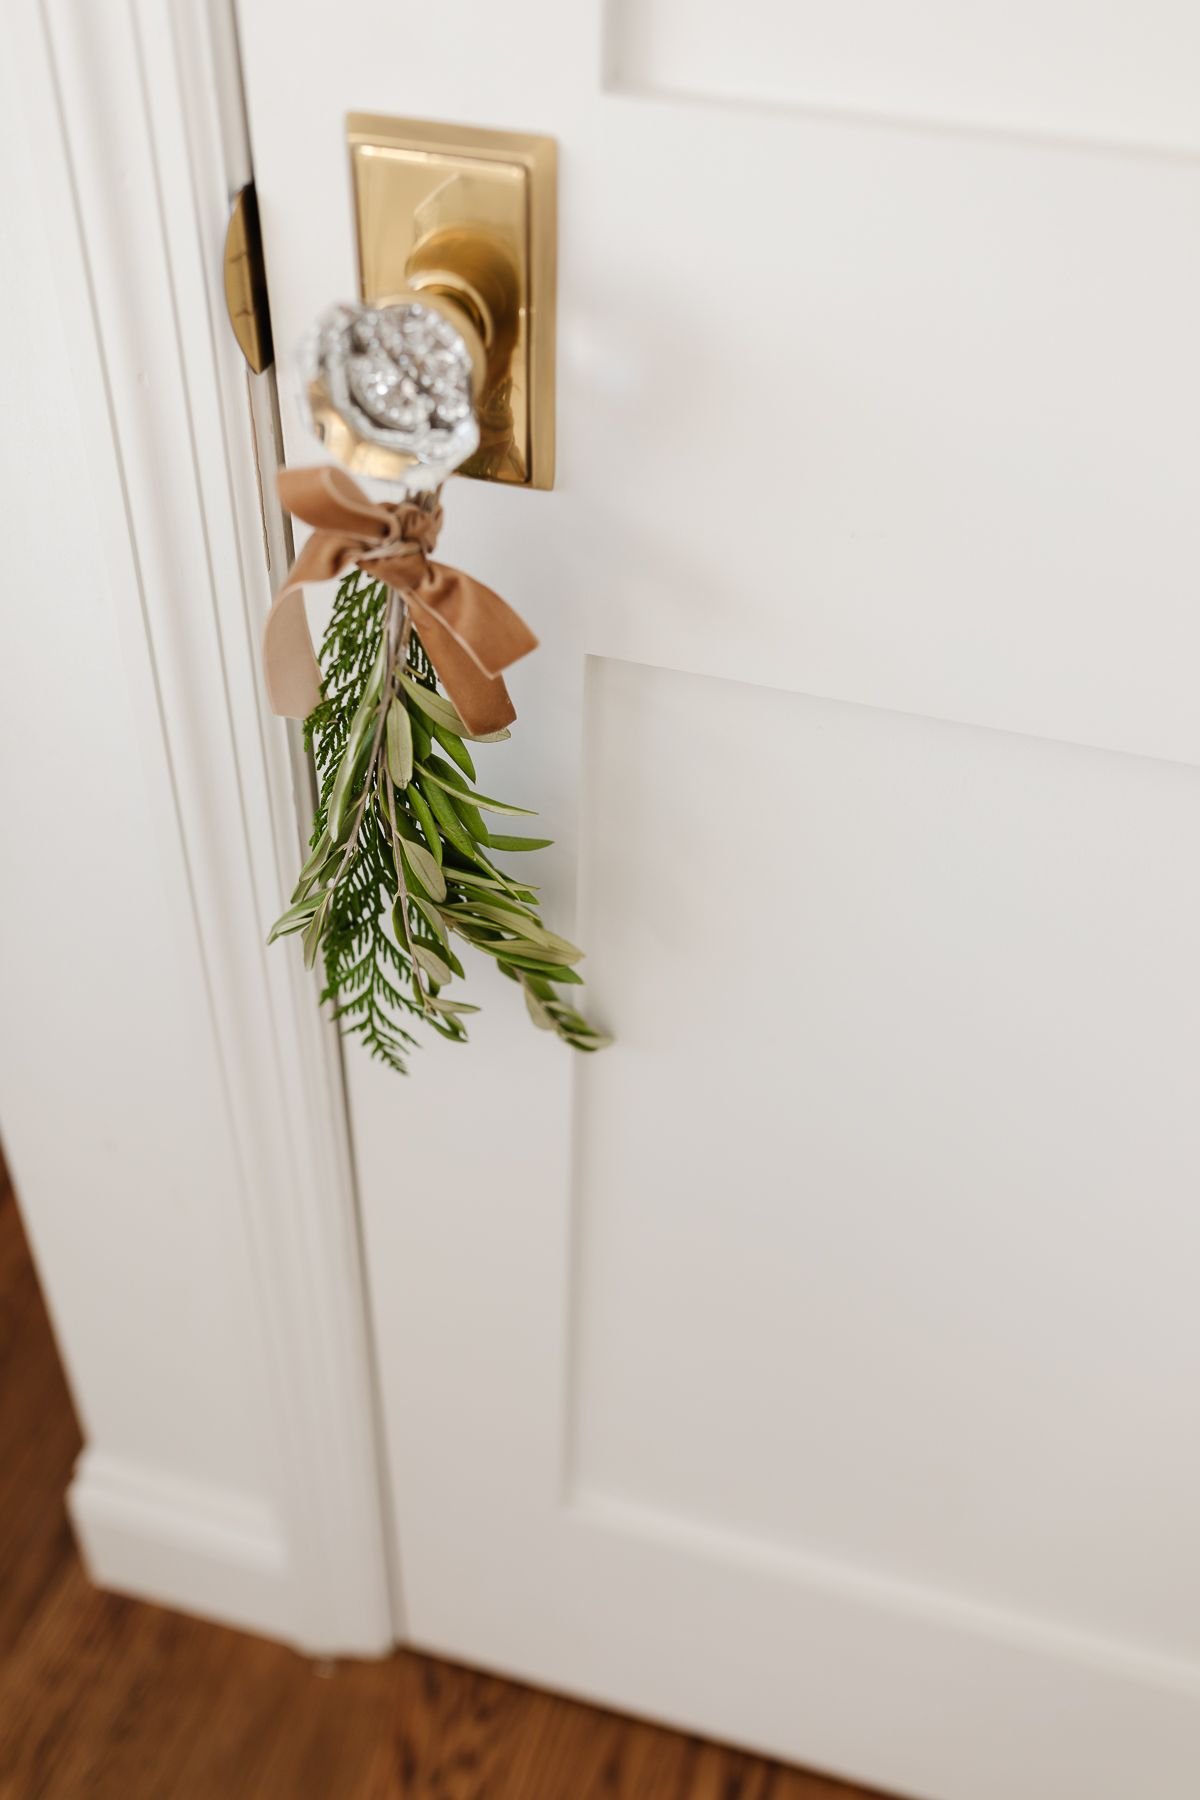 greenery tied onto a brass doorknob with a velvet ribbon